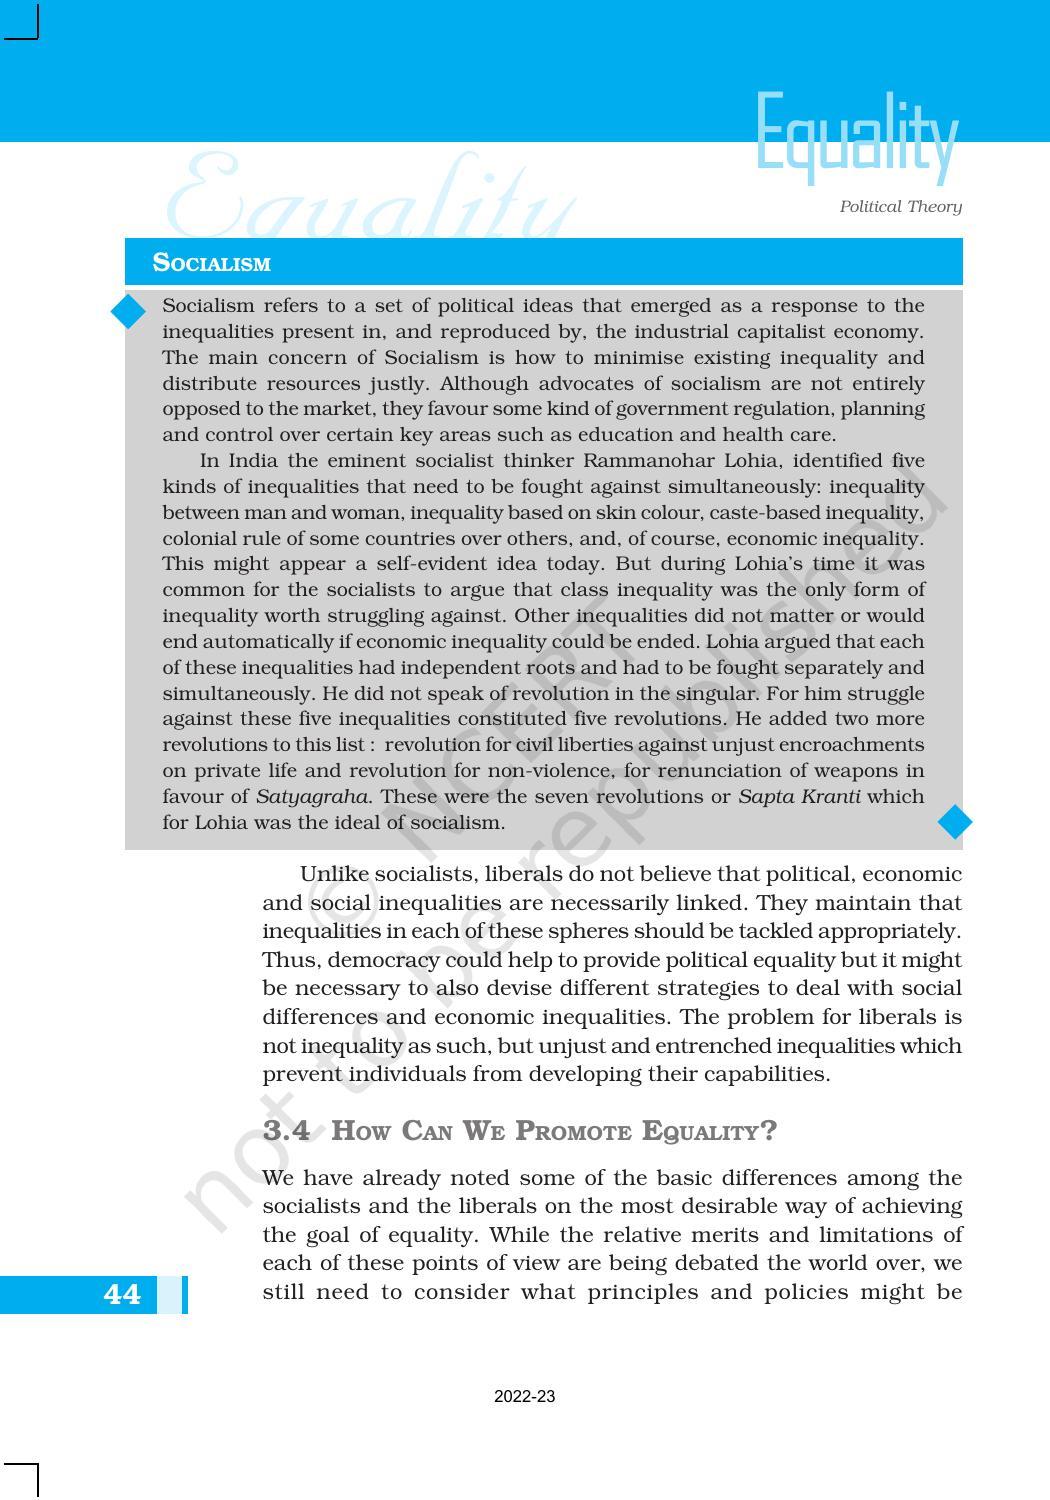 NCERT Book for Class 11 Political Science (Political Theory) Chapter 3 Equality - Page 14